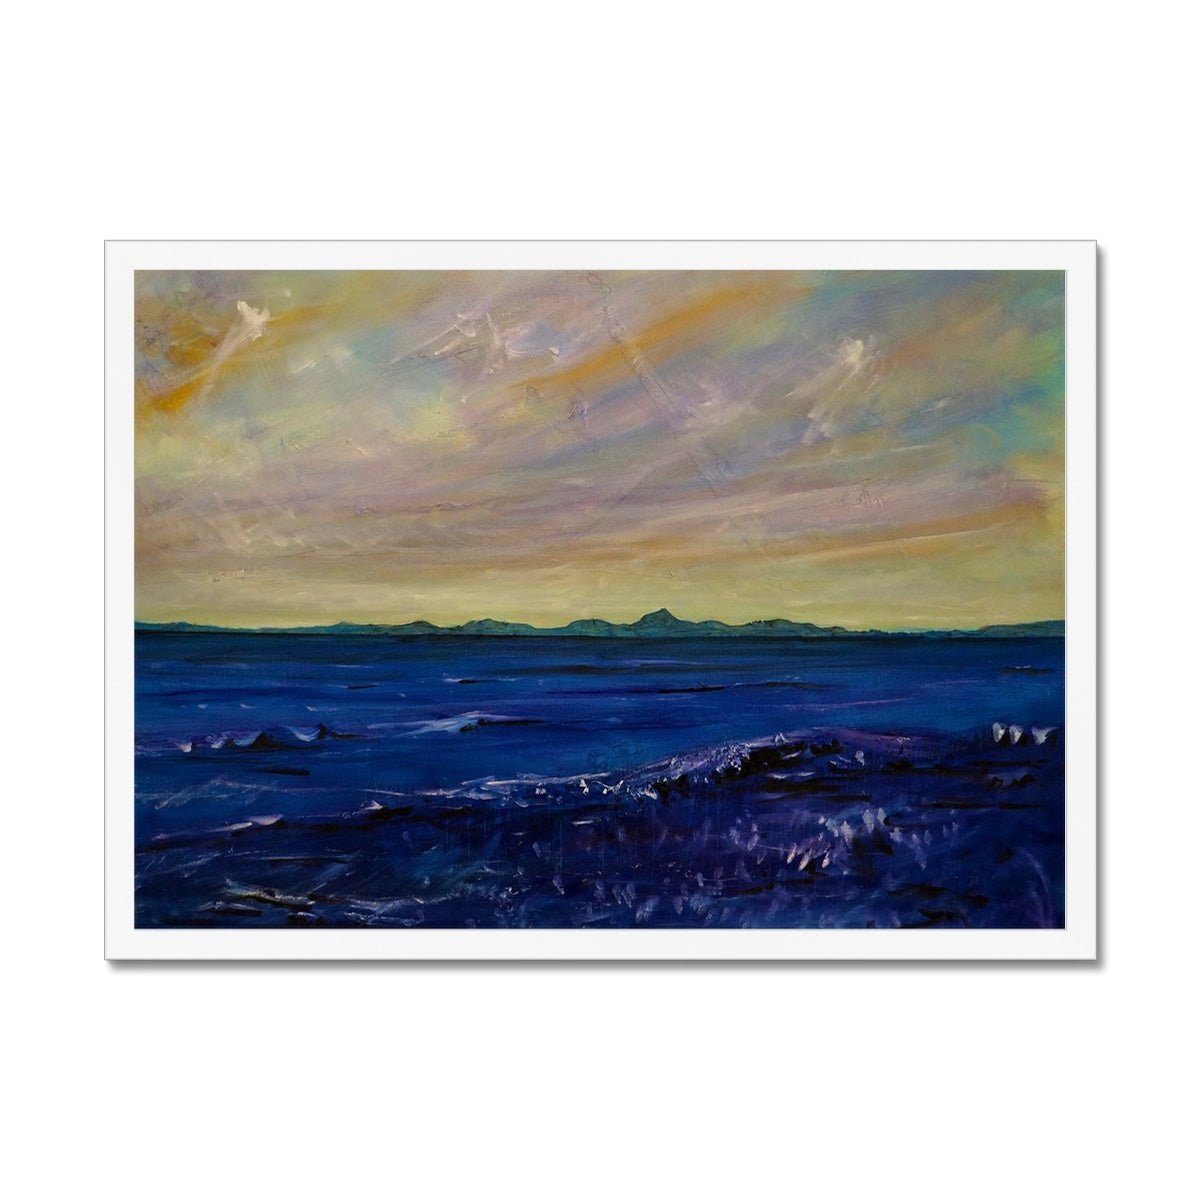 Jura Painting | Framed Prints From Scotland-Framed Prints-Hebridean Islands Art Gallery-A2 Landscape-White Frame-Paintings, Prints, Homeware, Art Gifts From Scotland By Scottish Artist Kevin Hunter